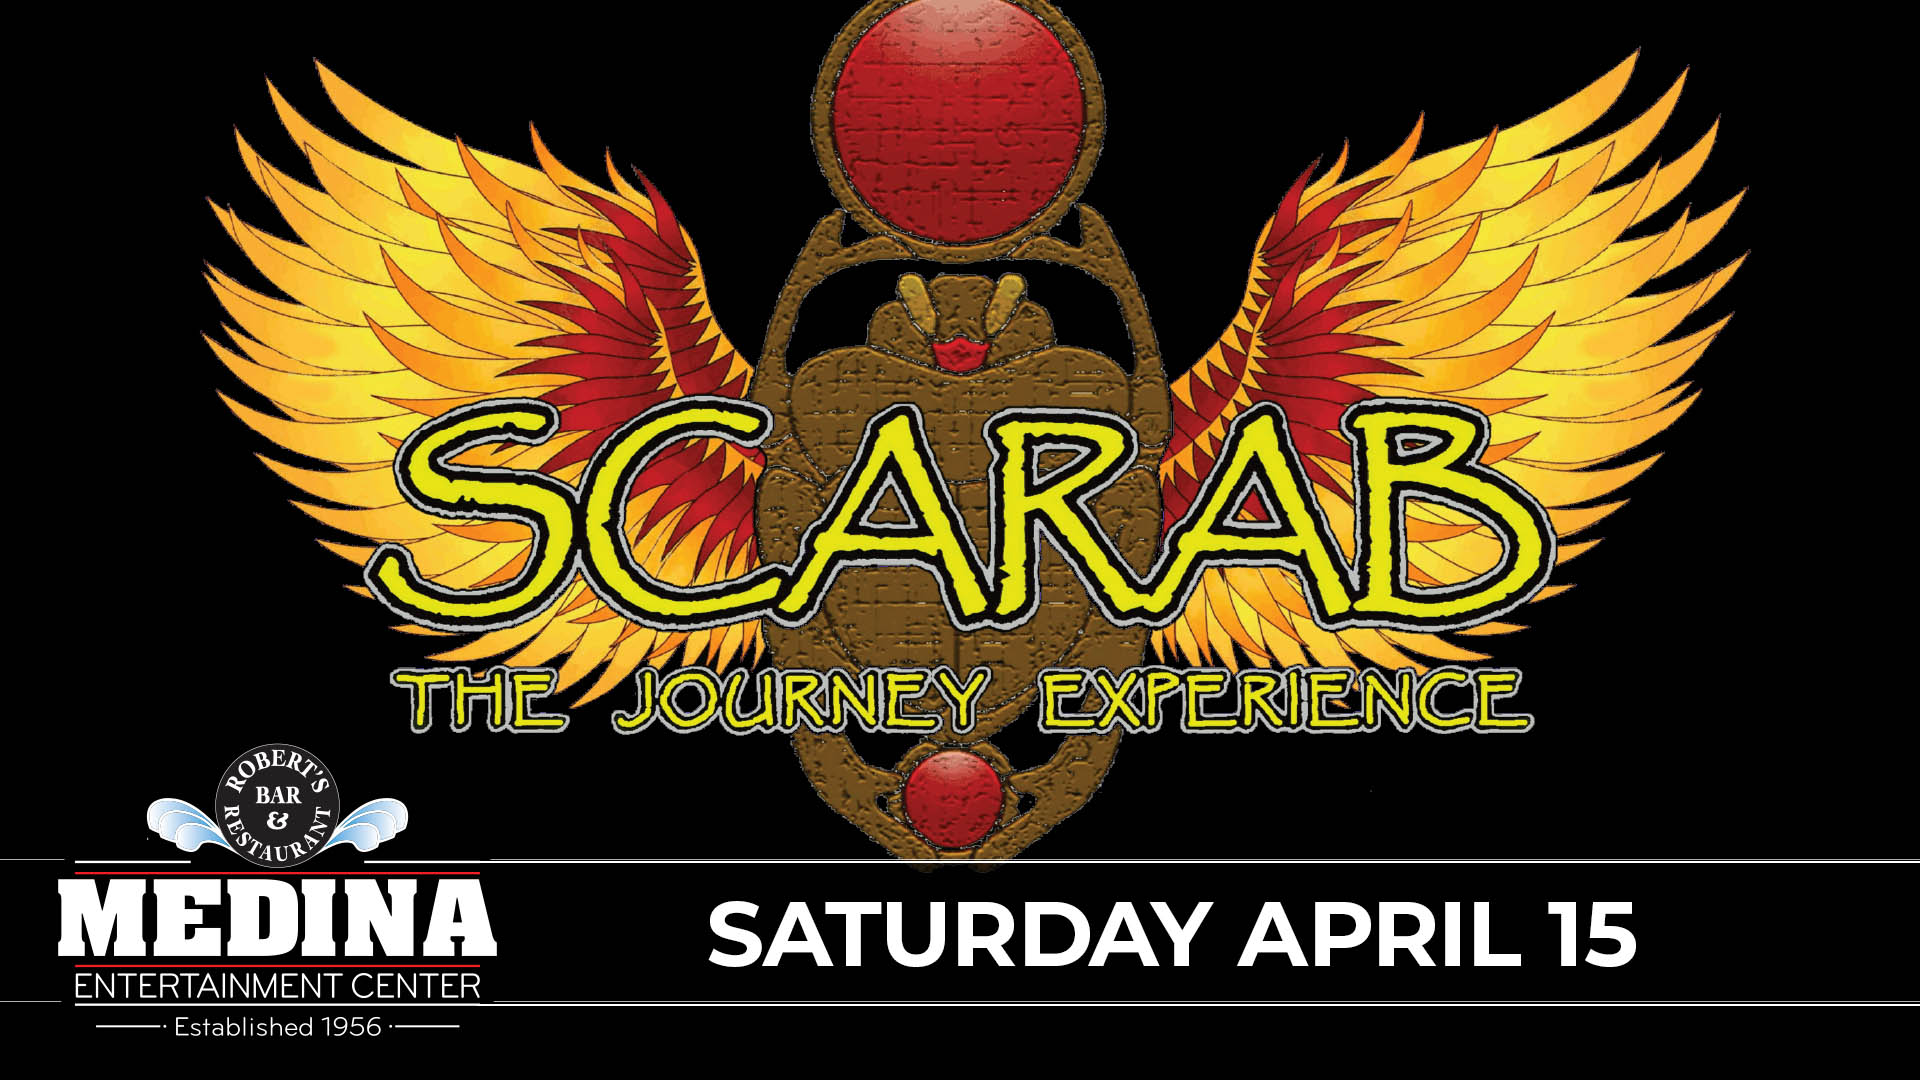 Scarab ~ The Journey Experience ~ Medina Entertainment Center Saturday, April 15th, 2023 Doors: 7:00PM | Music: 8:00PM | 21+ Tickets on-sale Friday, March 24th at 11AM General Seating $23/ Silver Reserved $28 / Gold Reserved $33 plus applicable fees